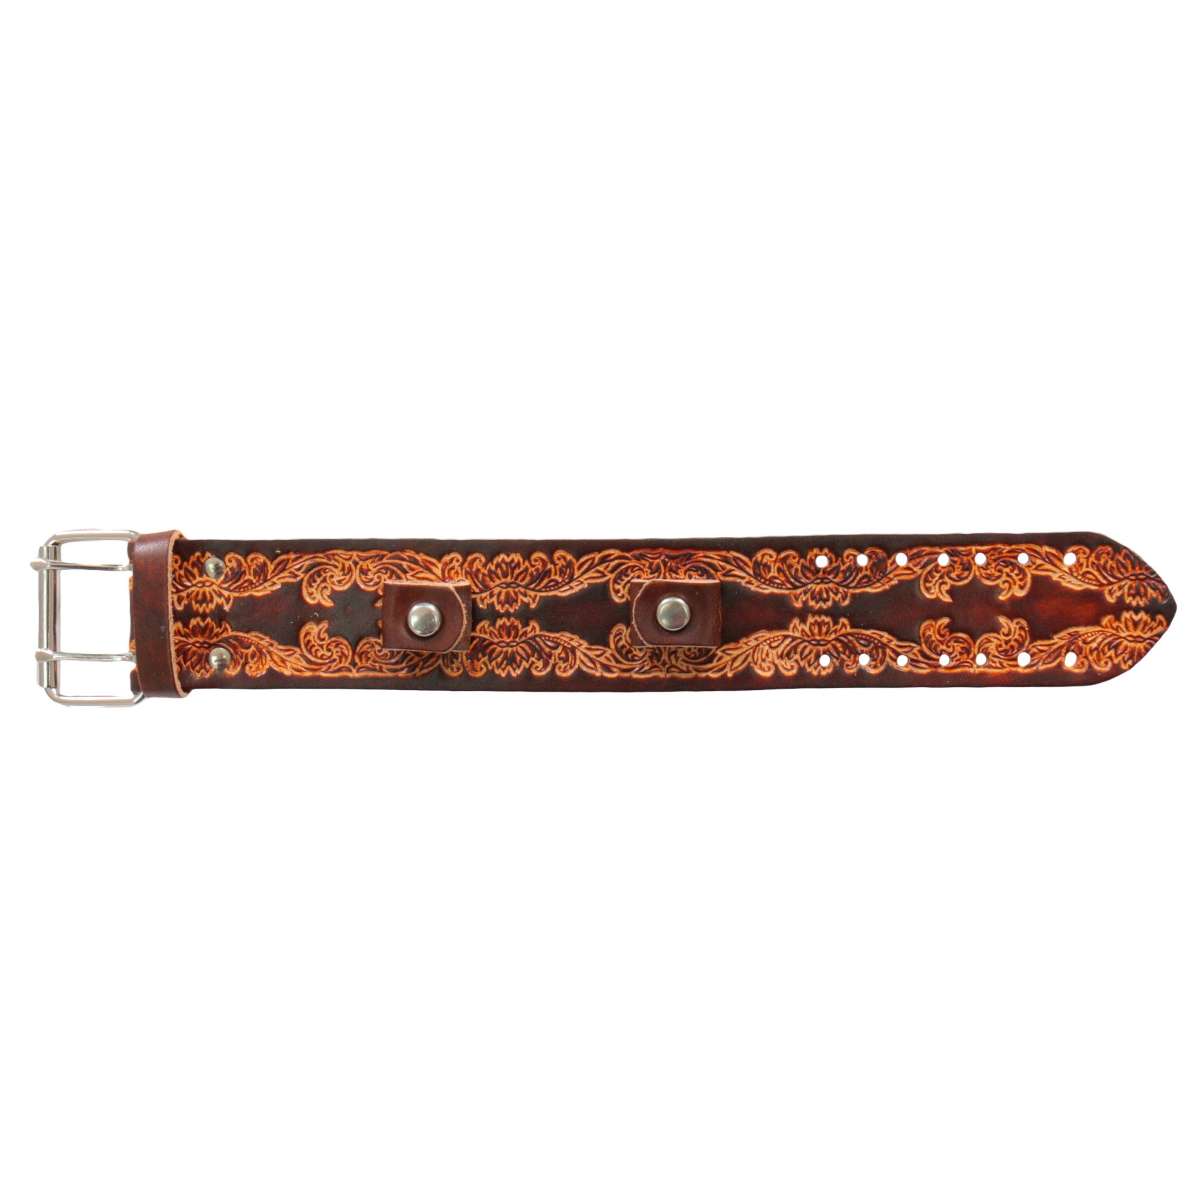 Hot Leathers 1.5" Antique Brown with Flourish Watch Band WTB1021